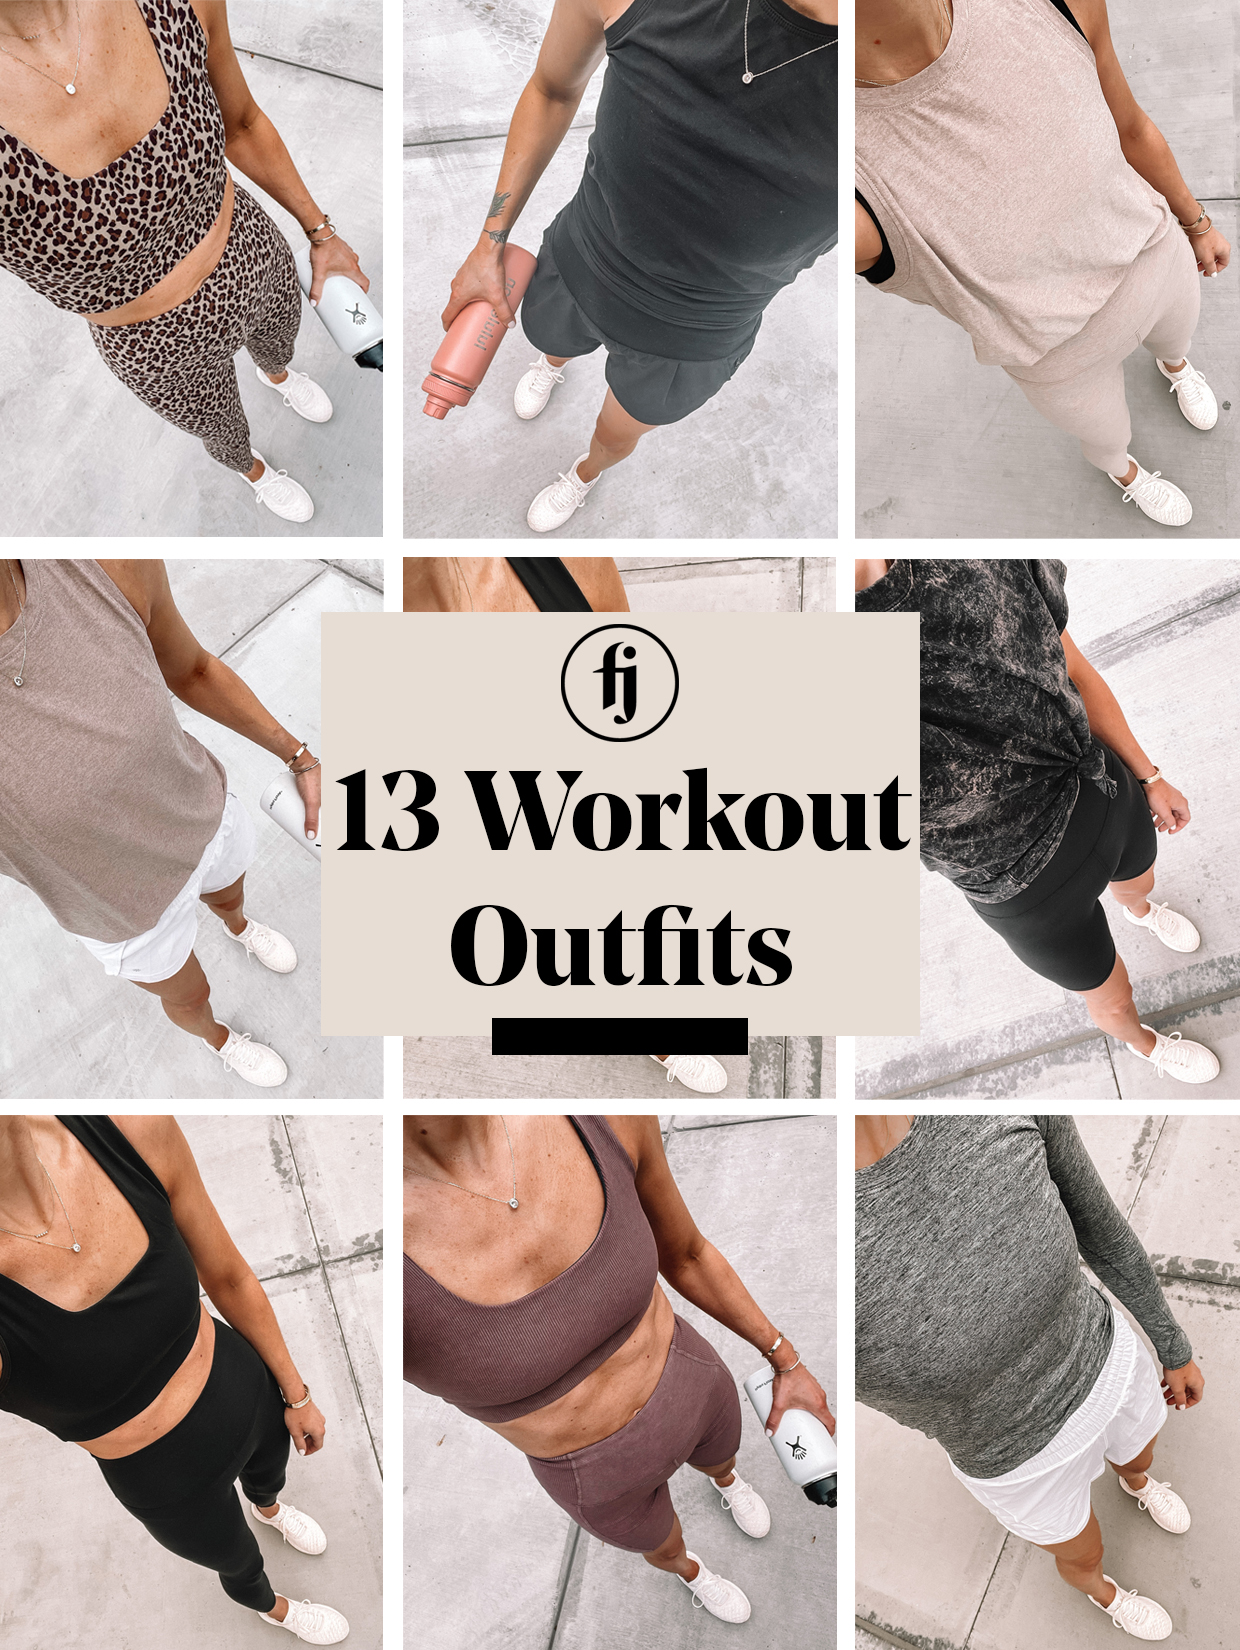 13 Gym Outfits That Will Make You Want to Workout ﻿ - Fashion Jackson